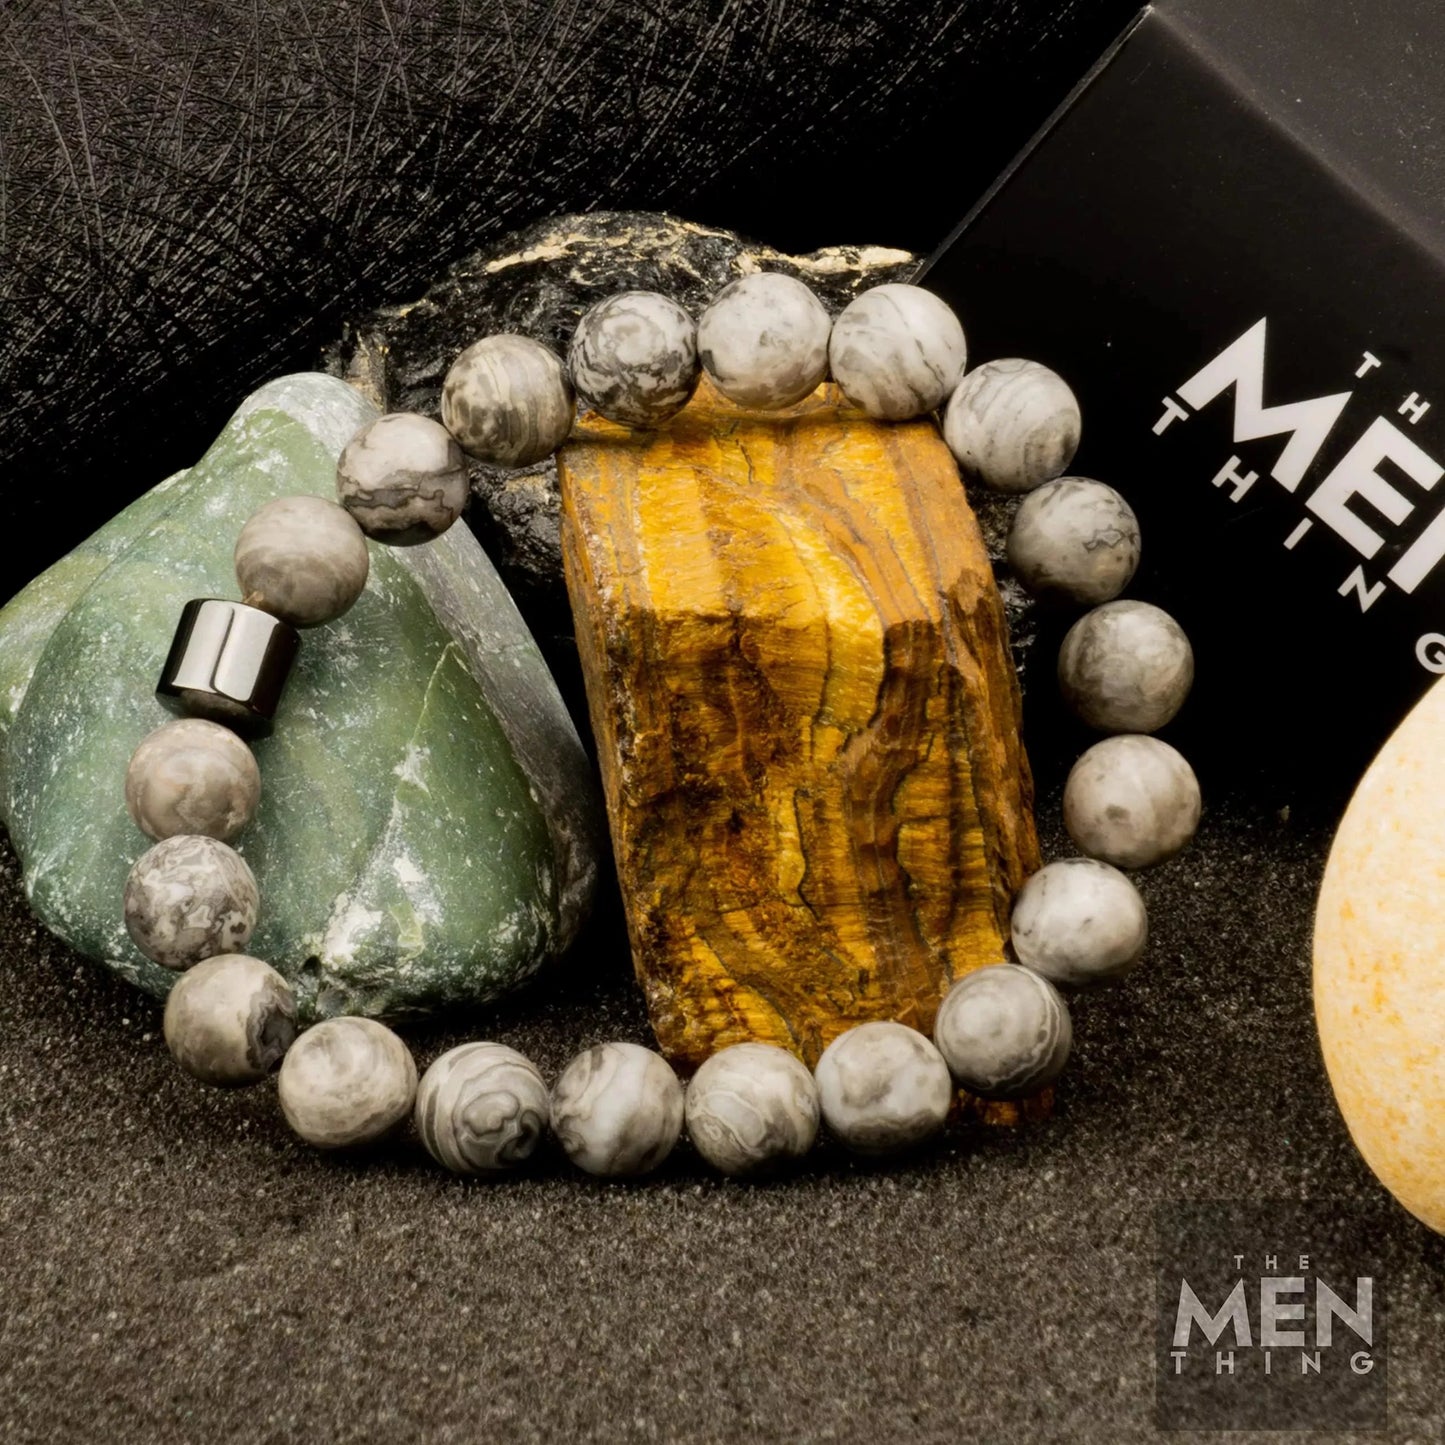 THE MEN THING Natural Beads Bracelet for Men - Become Money Magnet - Weathered Agate Stone Colorful 7 Chakra Energy Stretch Bracelet (7inch)